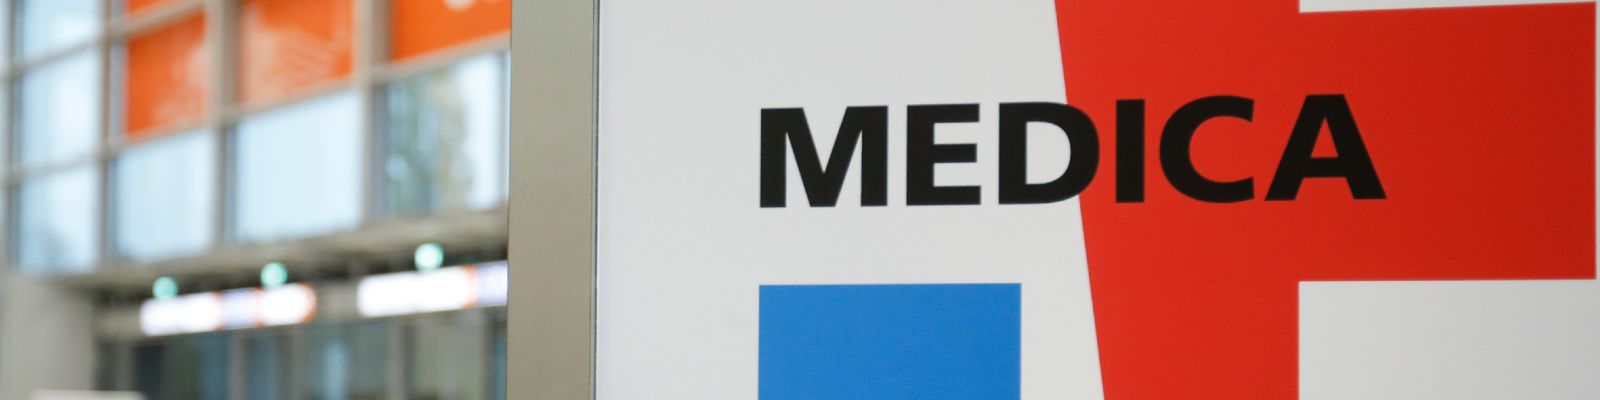 MEDICA - Meeting Point